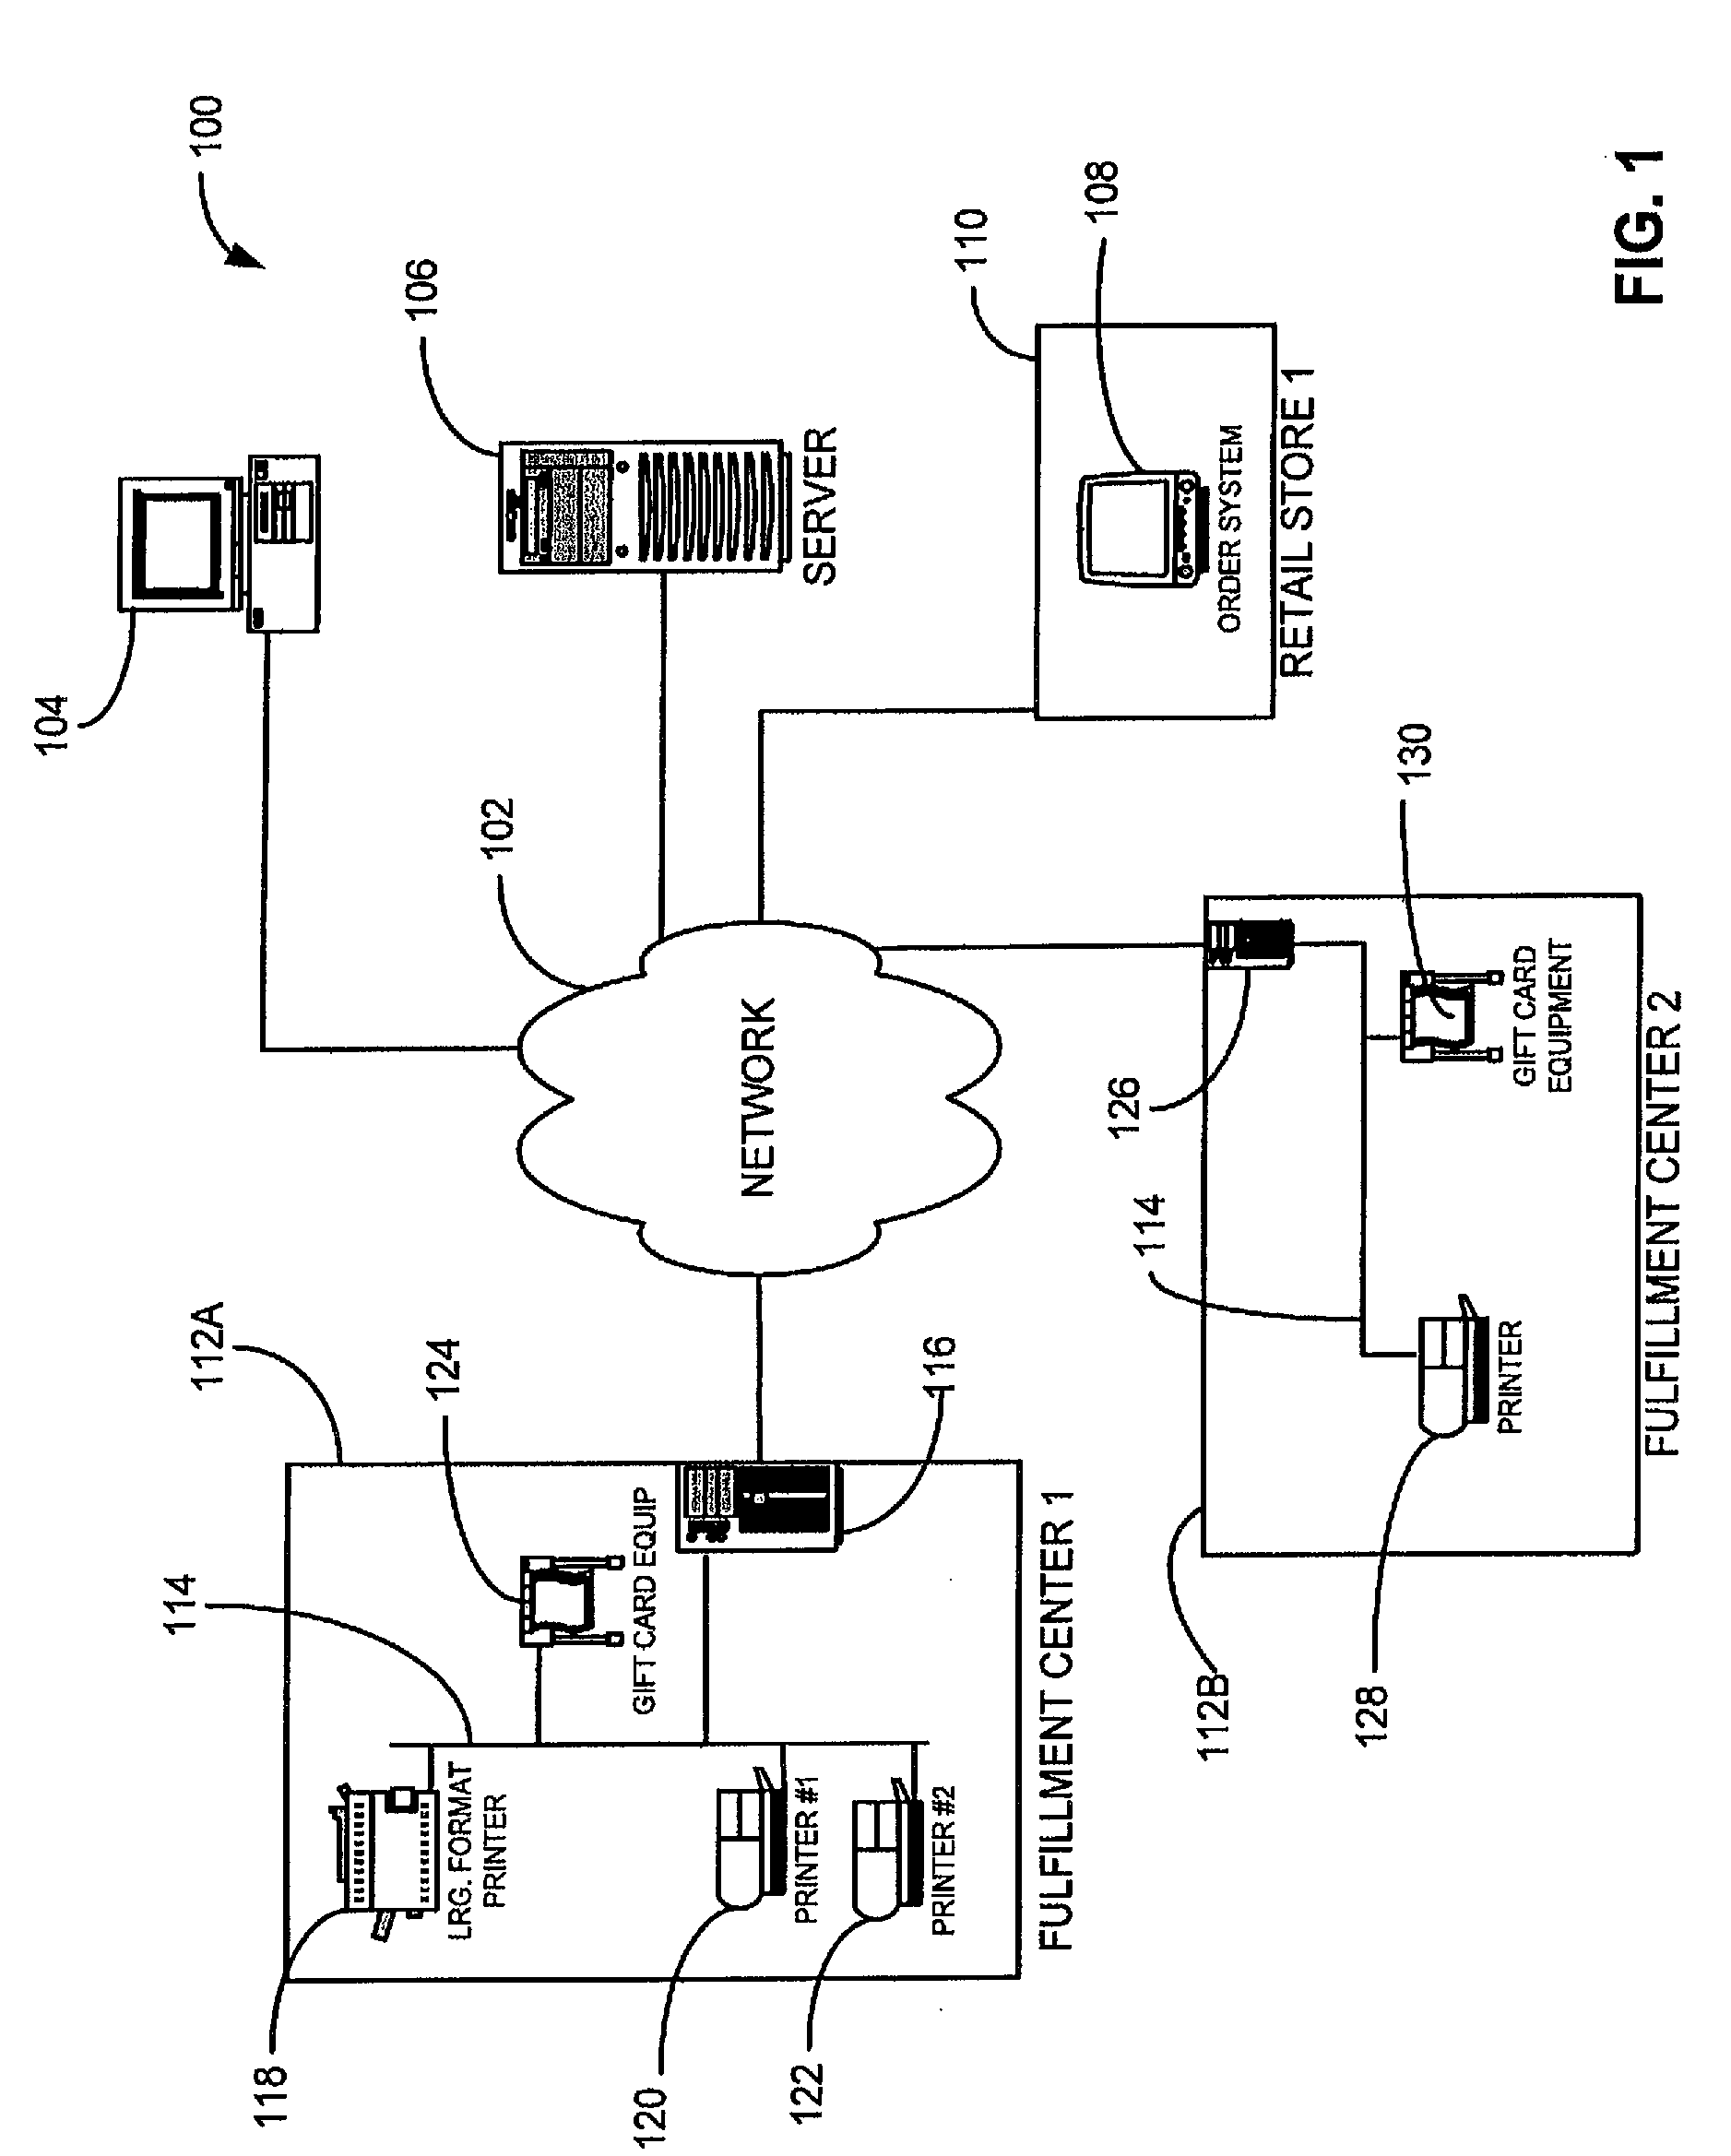 System and method for generating an enhanced index print product